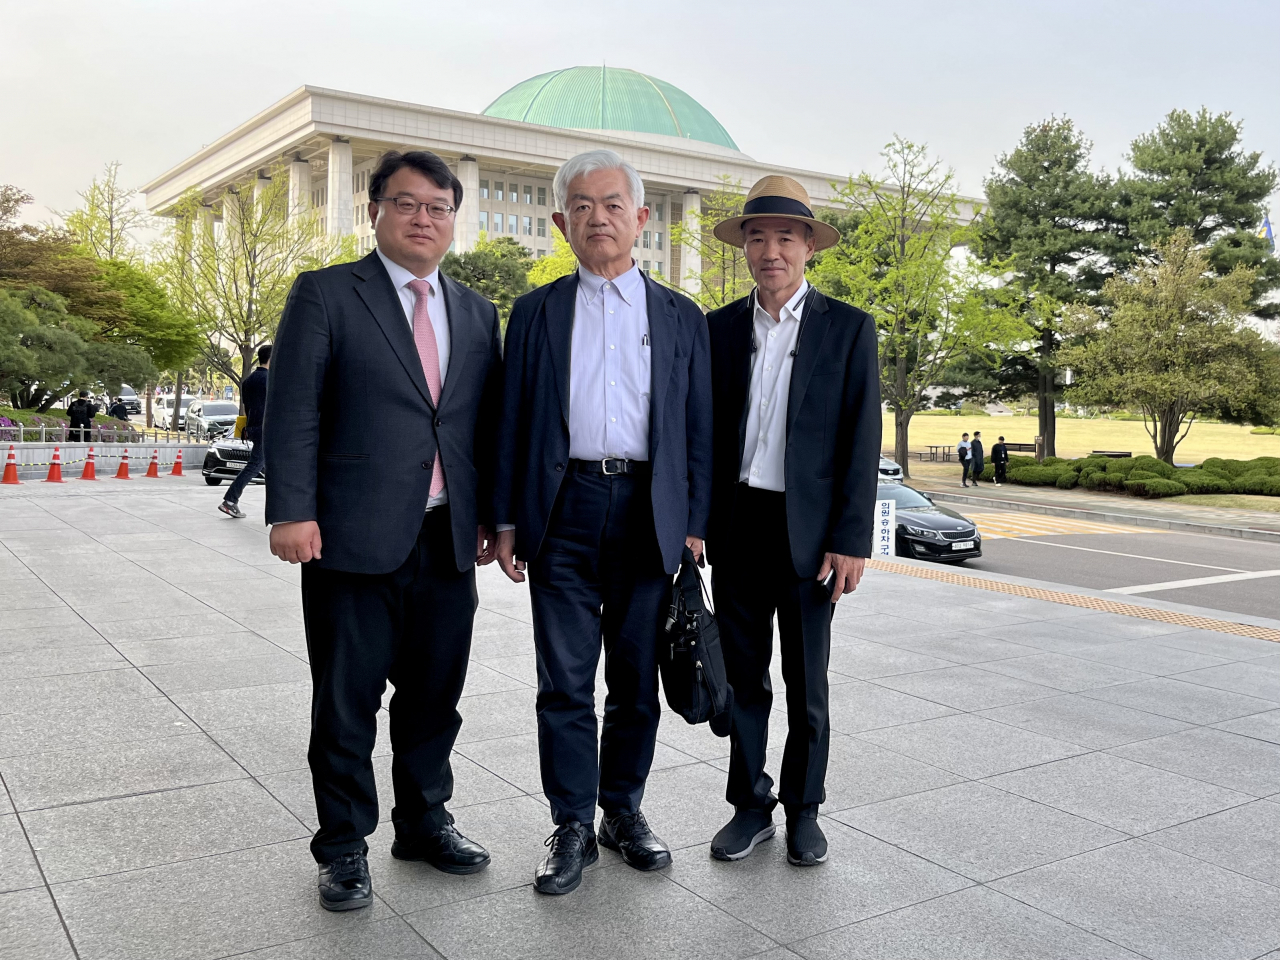 The older brother of a South Korean official killed by North Korean troops and the leader of a support group of missing Japanese people meet at the National Assembly in Seoul on Thursday. From left: Lawyer Kim Ki-yun; Kazuhiro Araki, the leader of the support group for Japanese victims of abduction by North Korea; and Lee Rae-jin, the late official’s older brother. (Kim Arin/The Korea Herald)